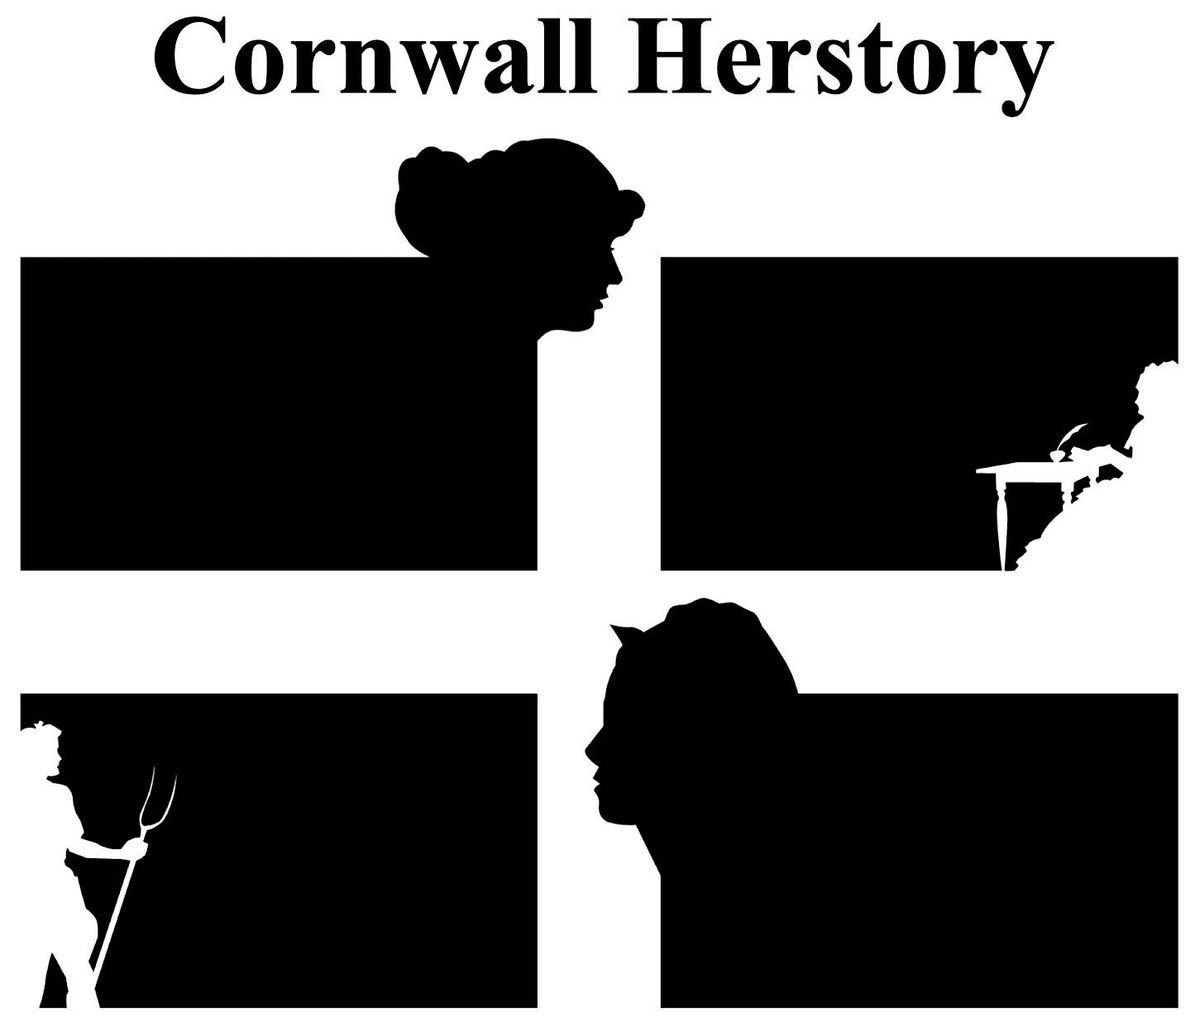 Notable Women of Cornwall in History